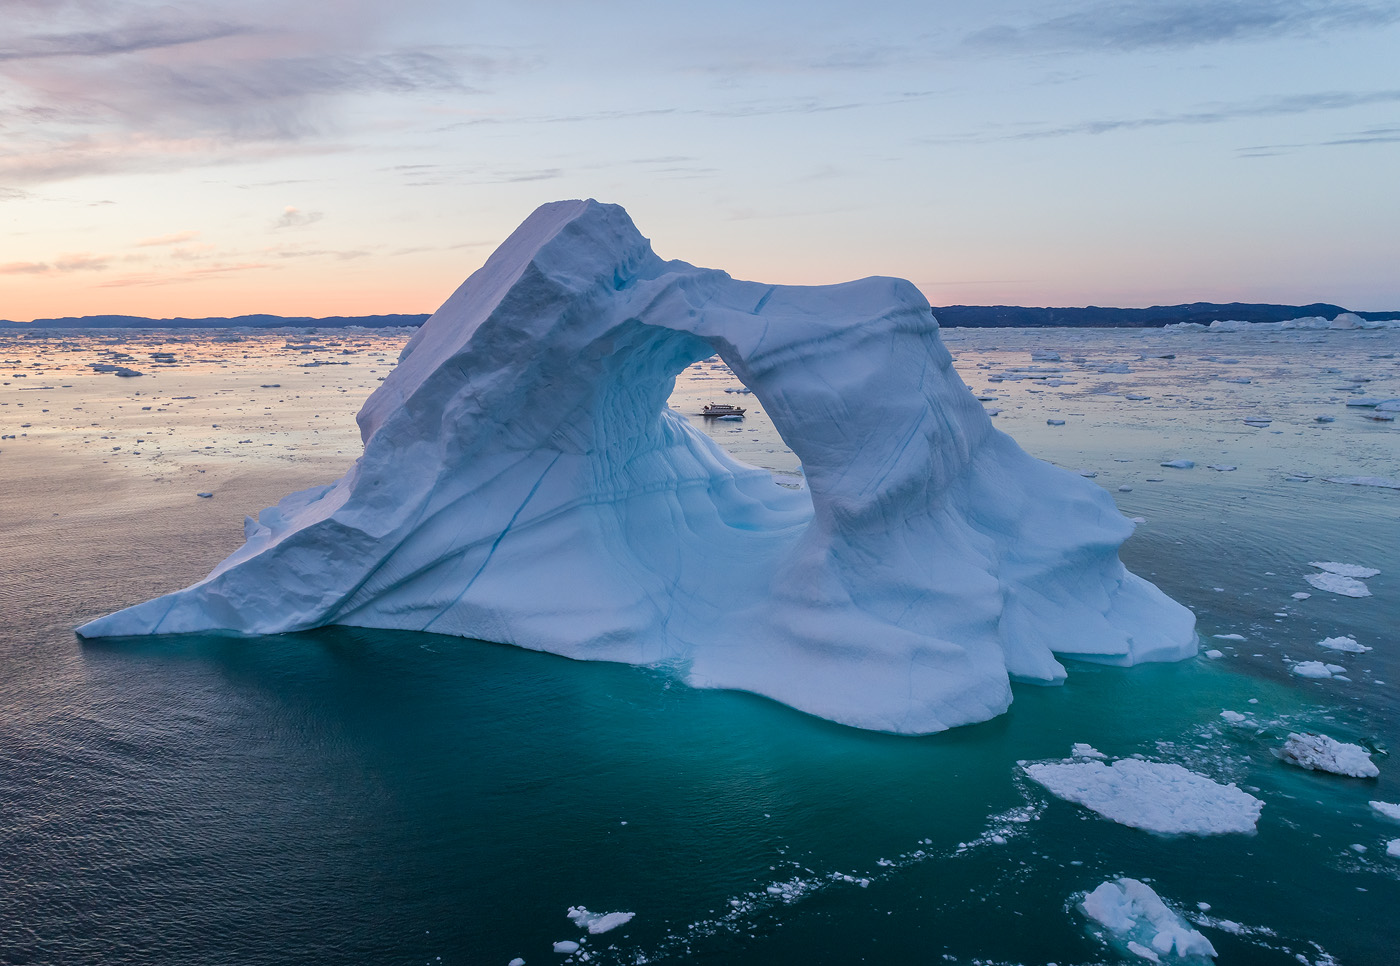 The window of showing the boat in the middle of the arch was very small. Delicate movements of the drone allowed me to get the shot with ease. </br>DJI Phantom 4 Pro, 1/40 sec, F5.6, ISO 200. Disko Bay, Greenland